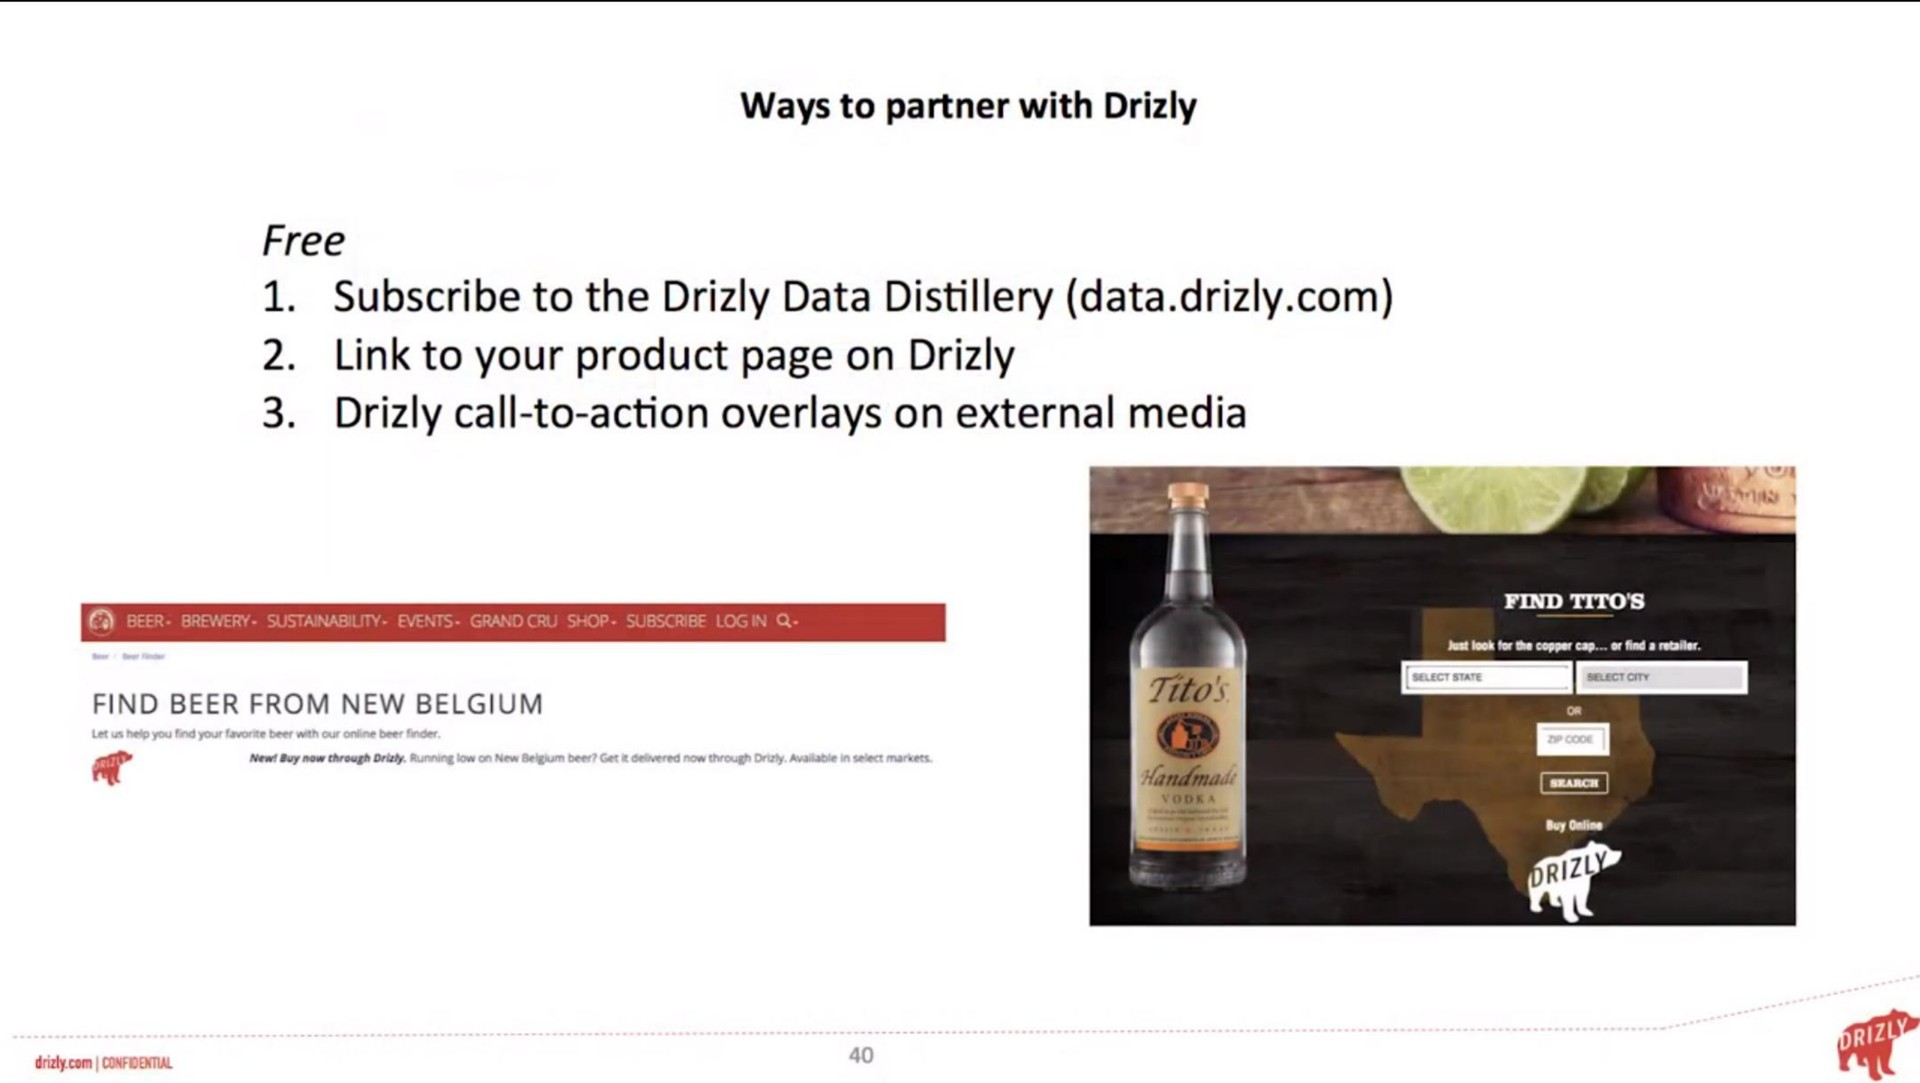 ways to partner with free subscribe to the data distillery data link to your product page on call to action overlays on external media | Drizly